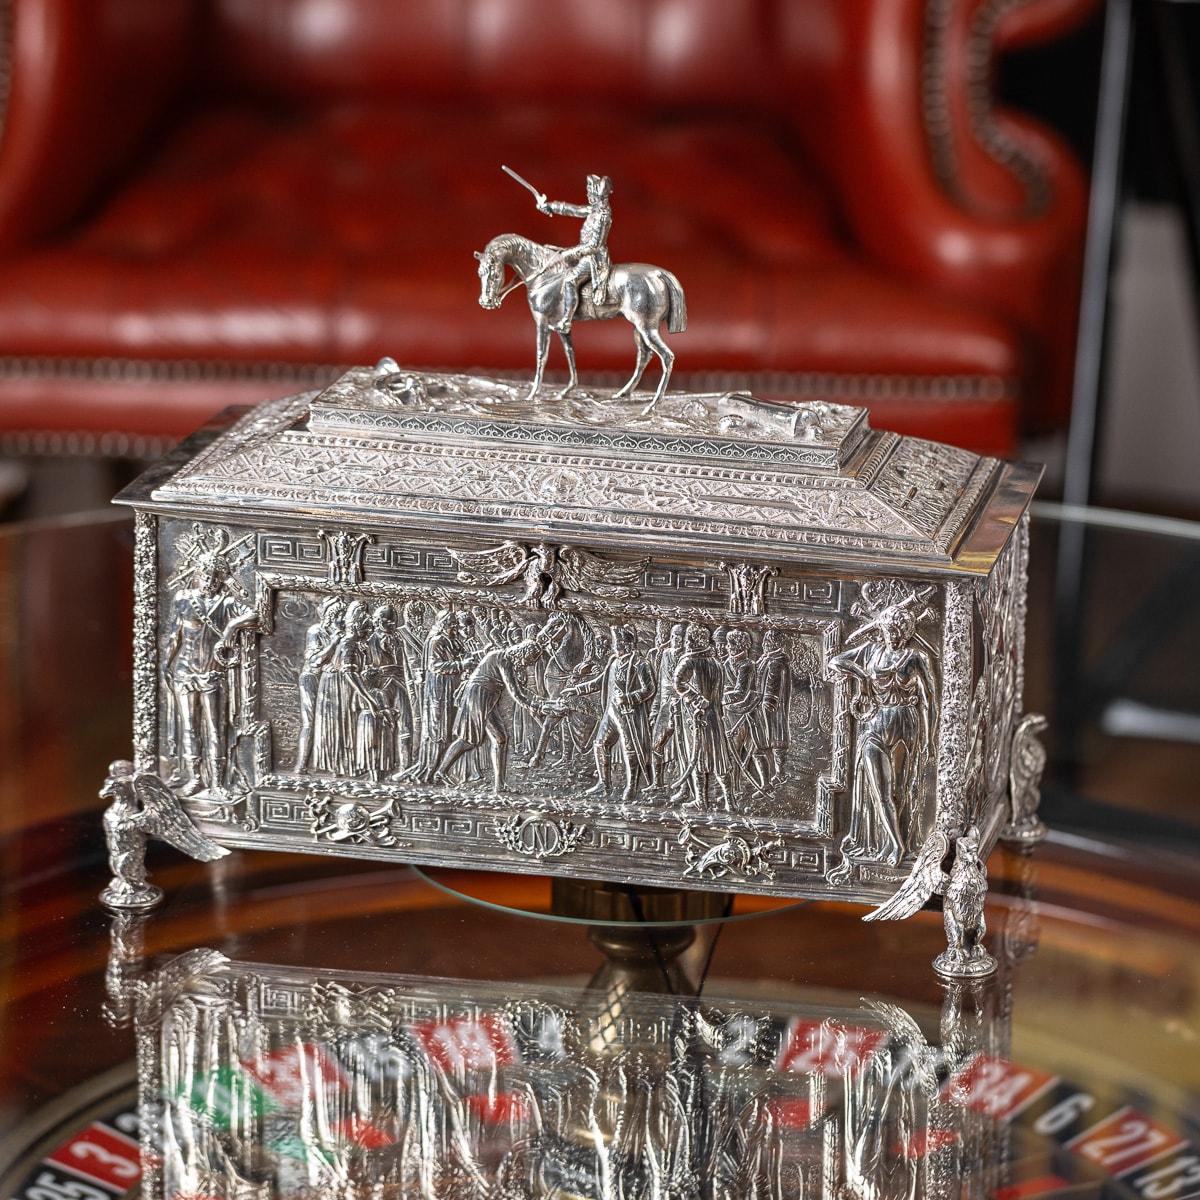 Antique early 20th Century German solid silver casket, decorated with scenes known as 'The Triumph of Napoleon'. This rectangular sarcophagus-shaped piece features intricate scenes on its panels: the front depicts Napoleon receiving the key to the